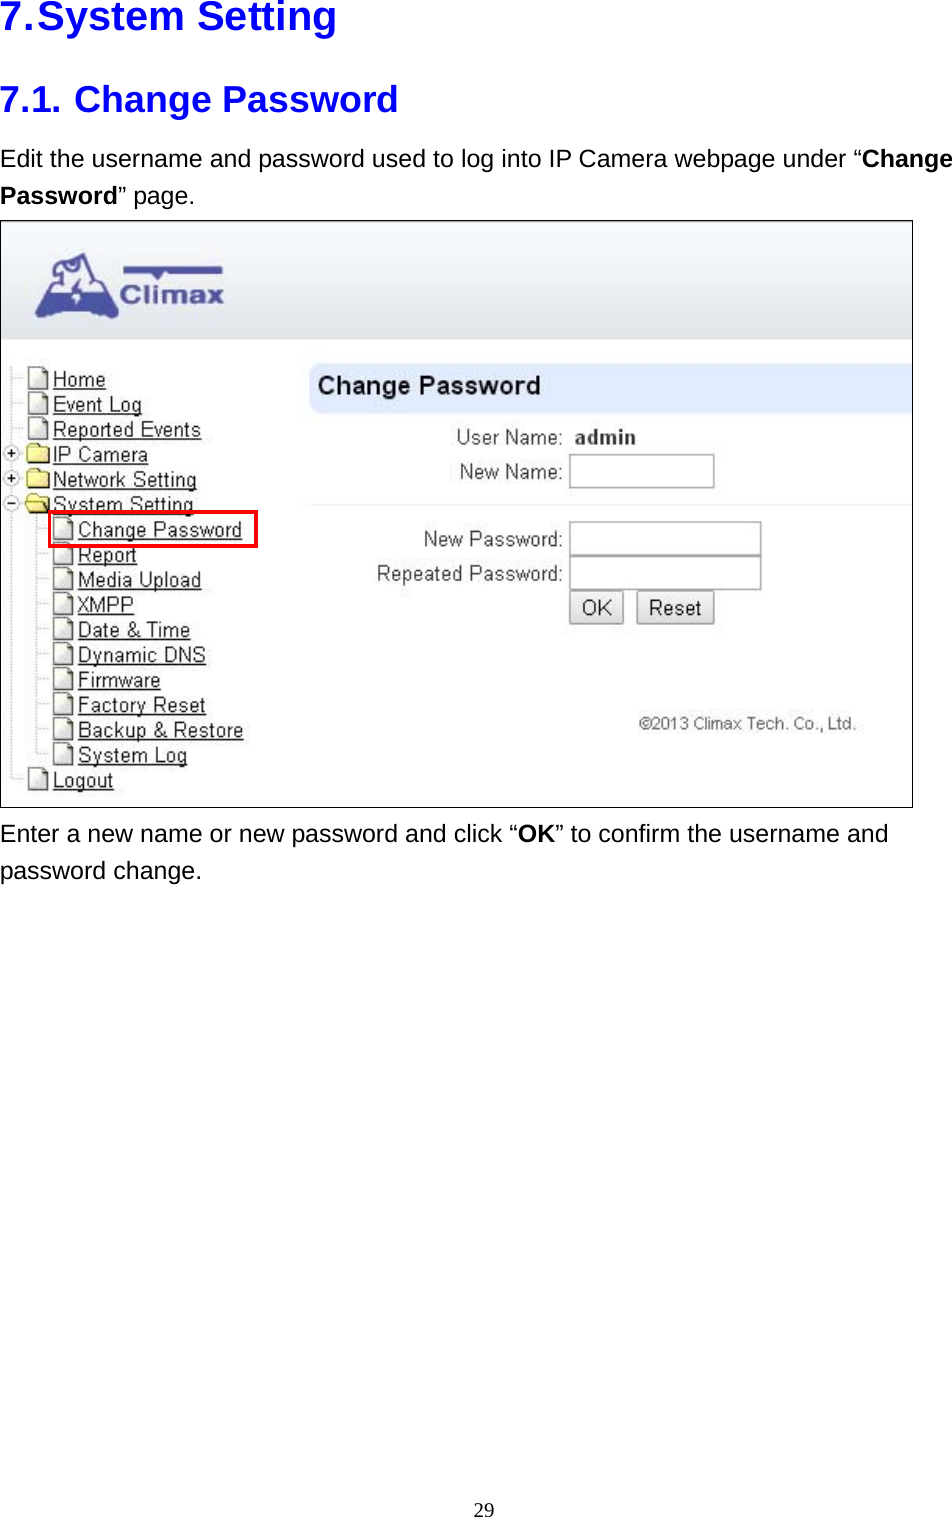 29  7. System  Setting 7.1. Change Password Edit the username and password used to log into IP Camera webpage under “Change Password” page.  Enter a new name or new password and click “OK” to confirm the username and password change.  